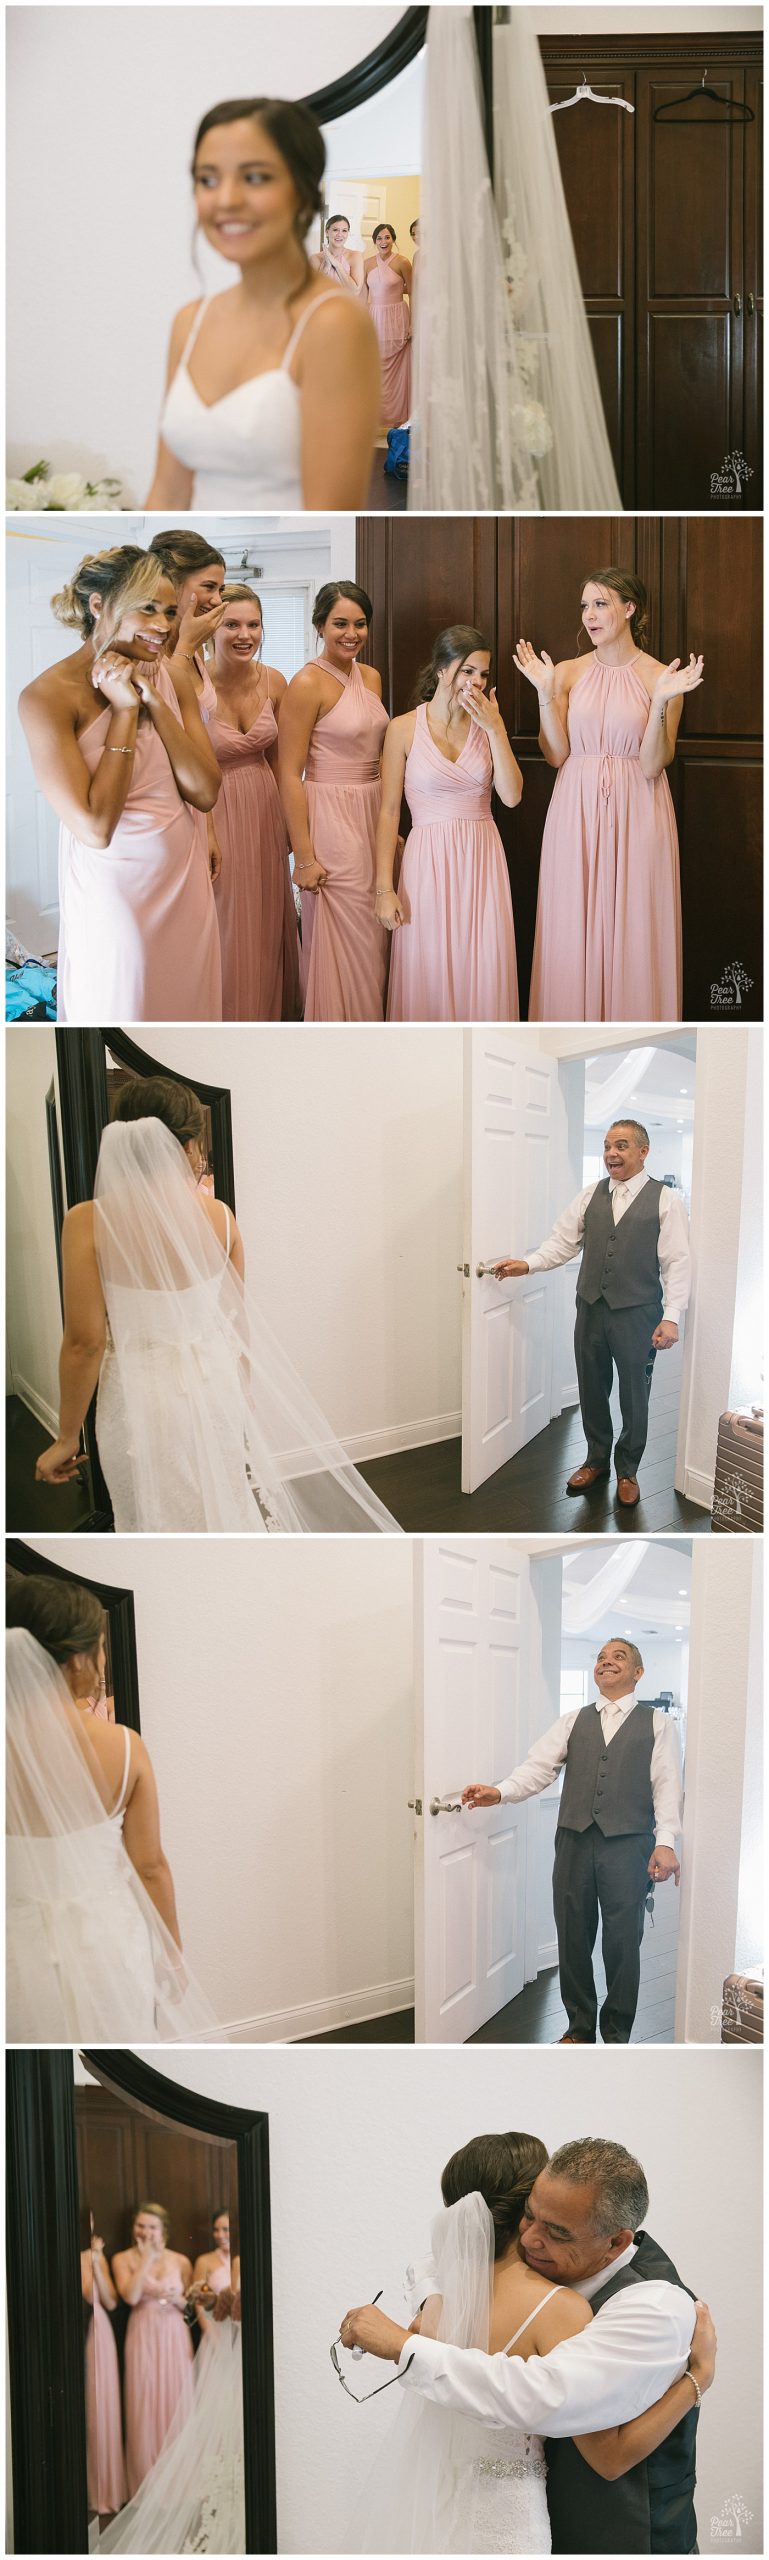 Bride's Dad seeing her dressed in her wedding gown at the Royal Crest Room for the first time